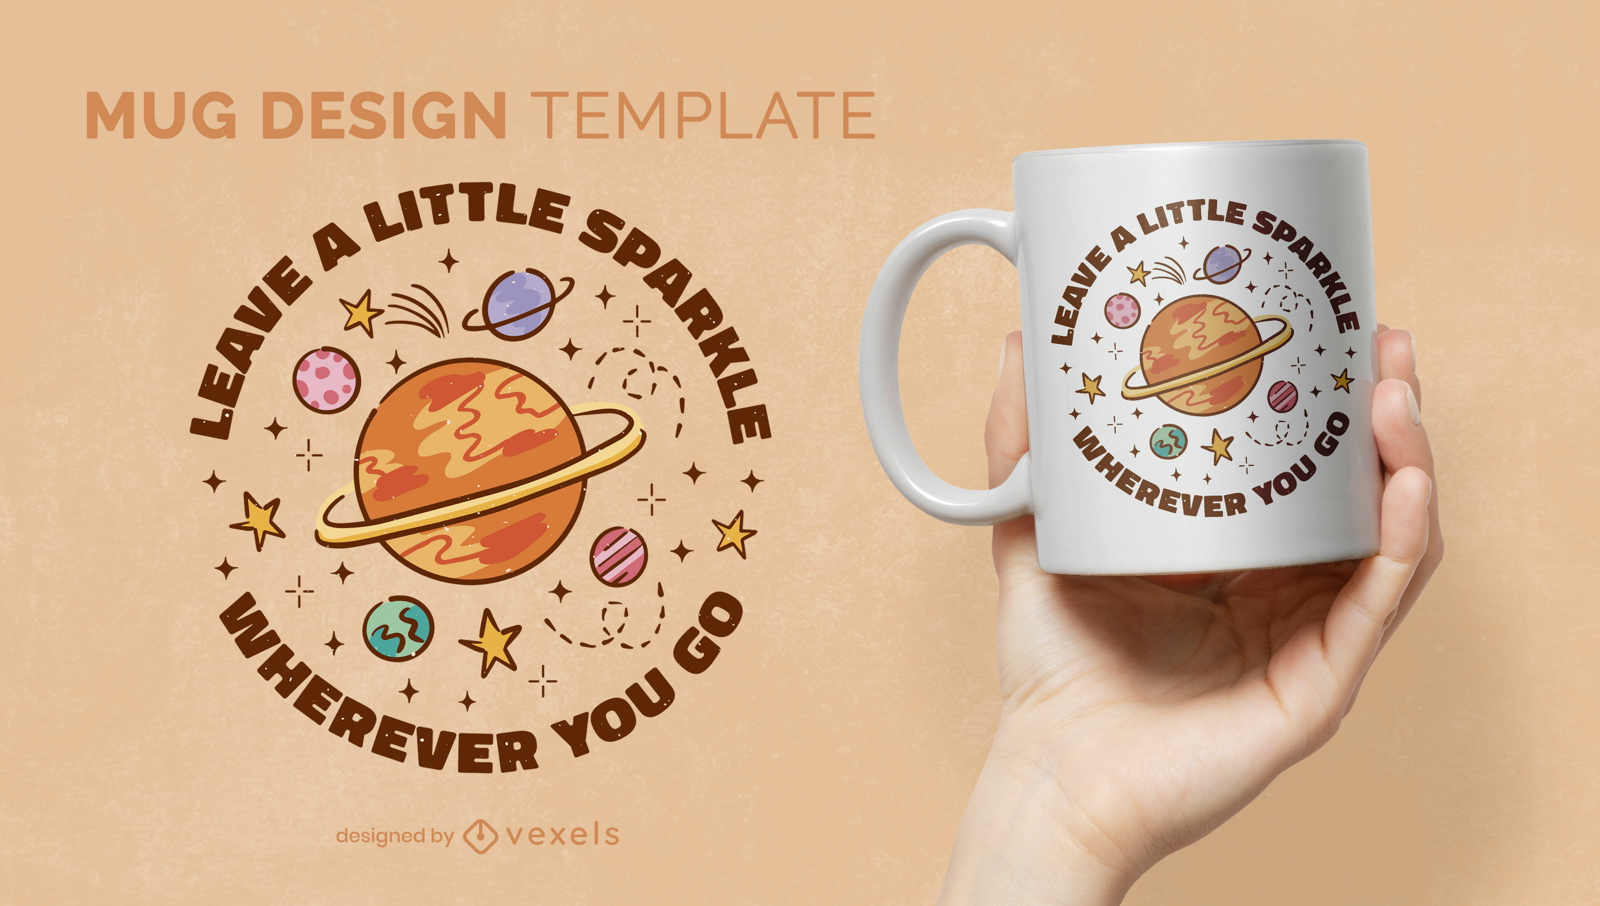 Planets in space mug template design